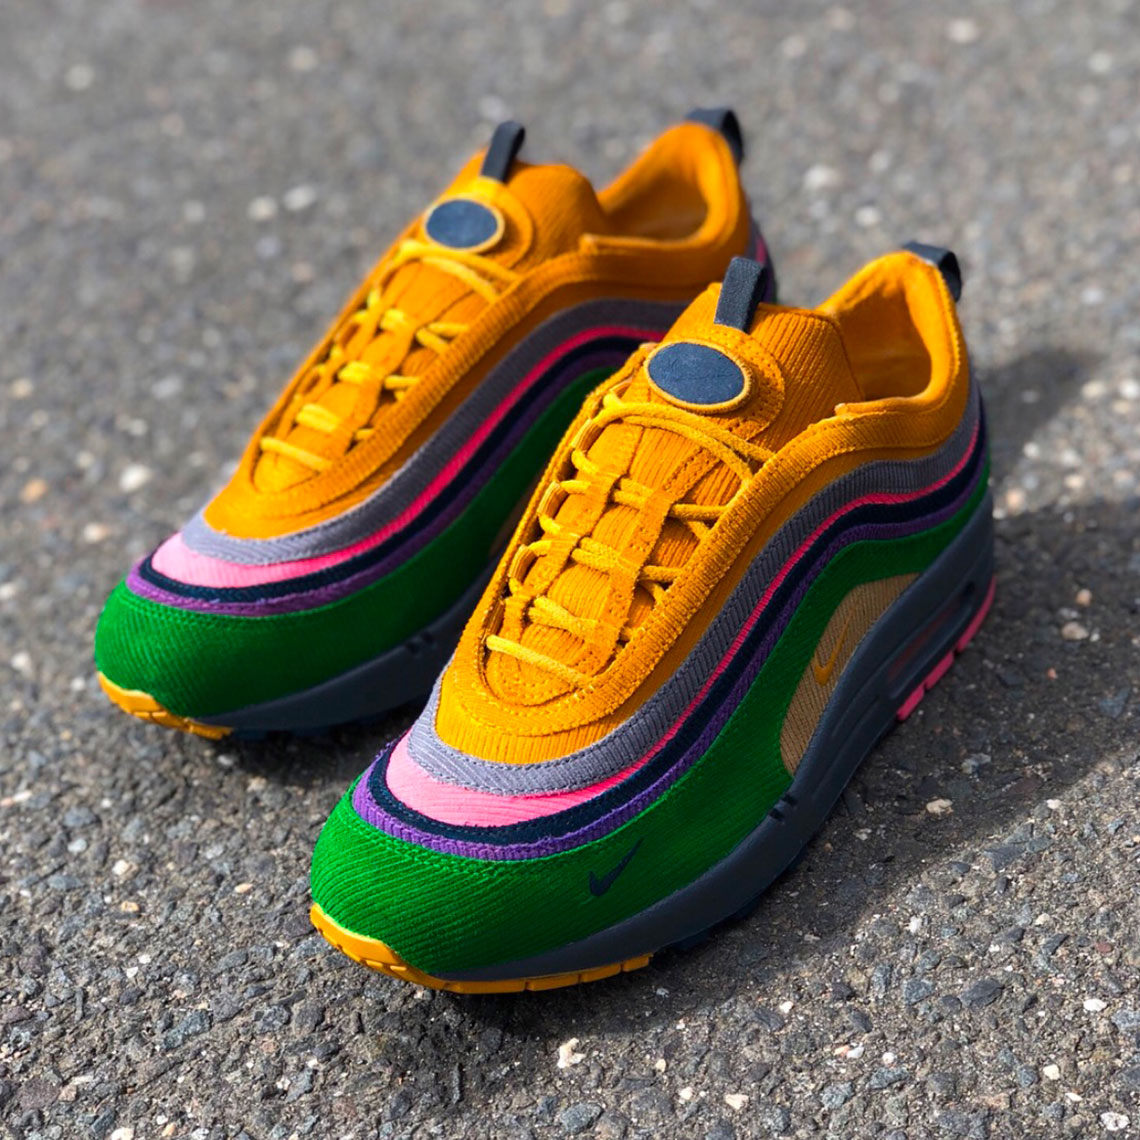 forget passage Cyber ​​space Sean Wotherspoon Air Max 97/1 "Eclipse" By Mache Customs | SneakerNews.com